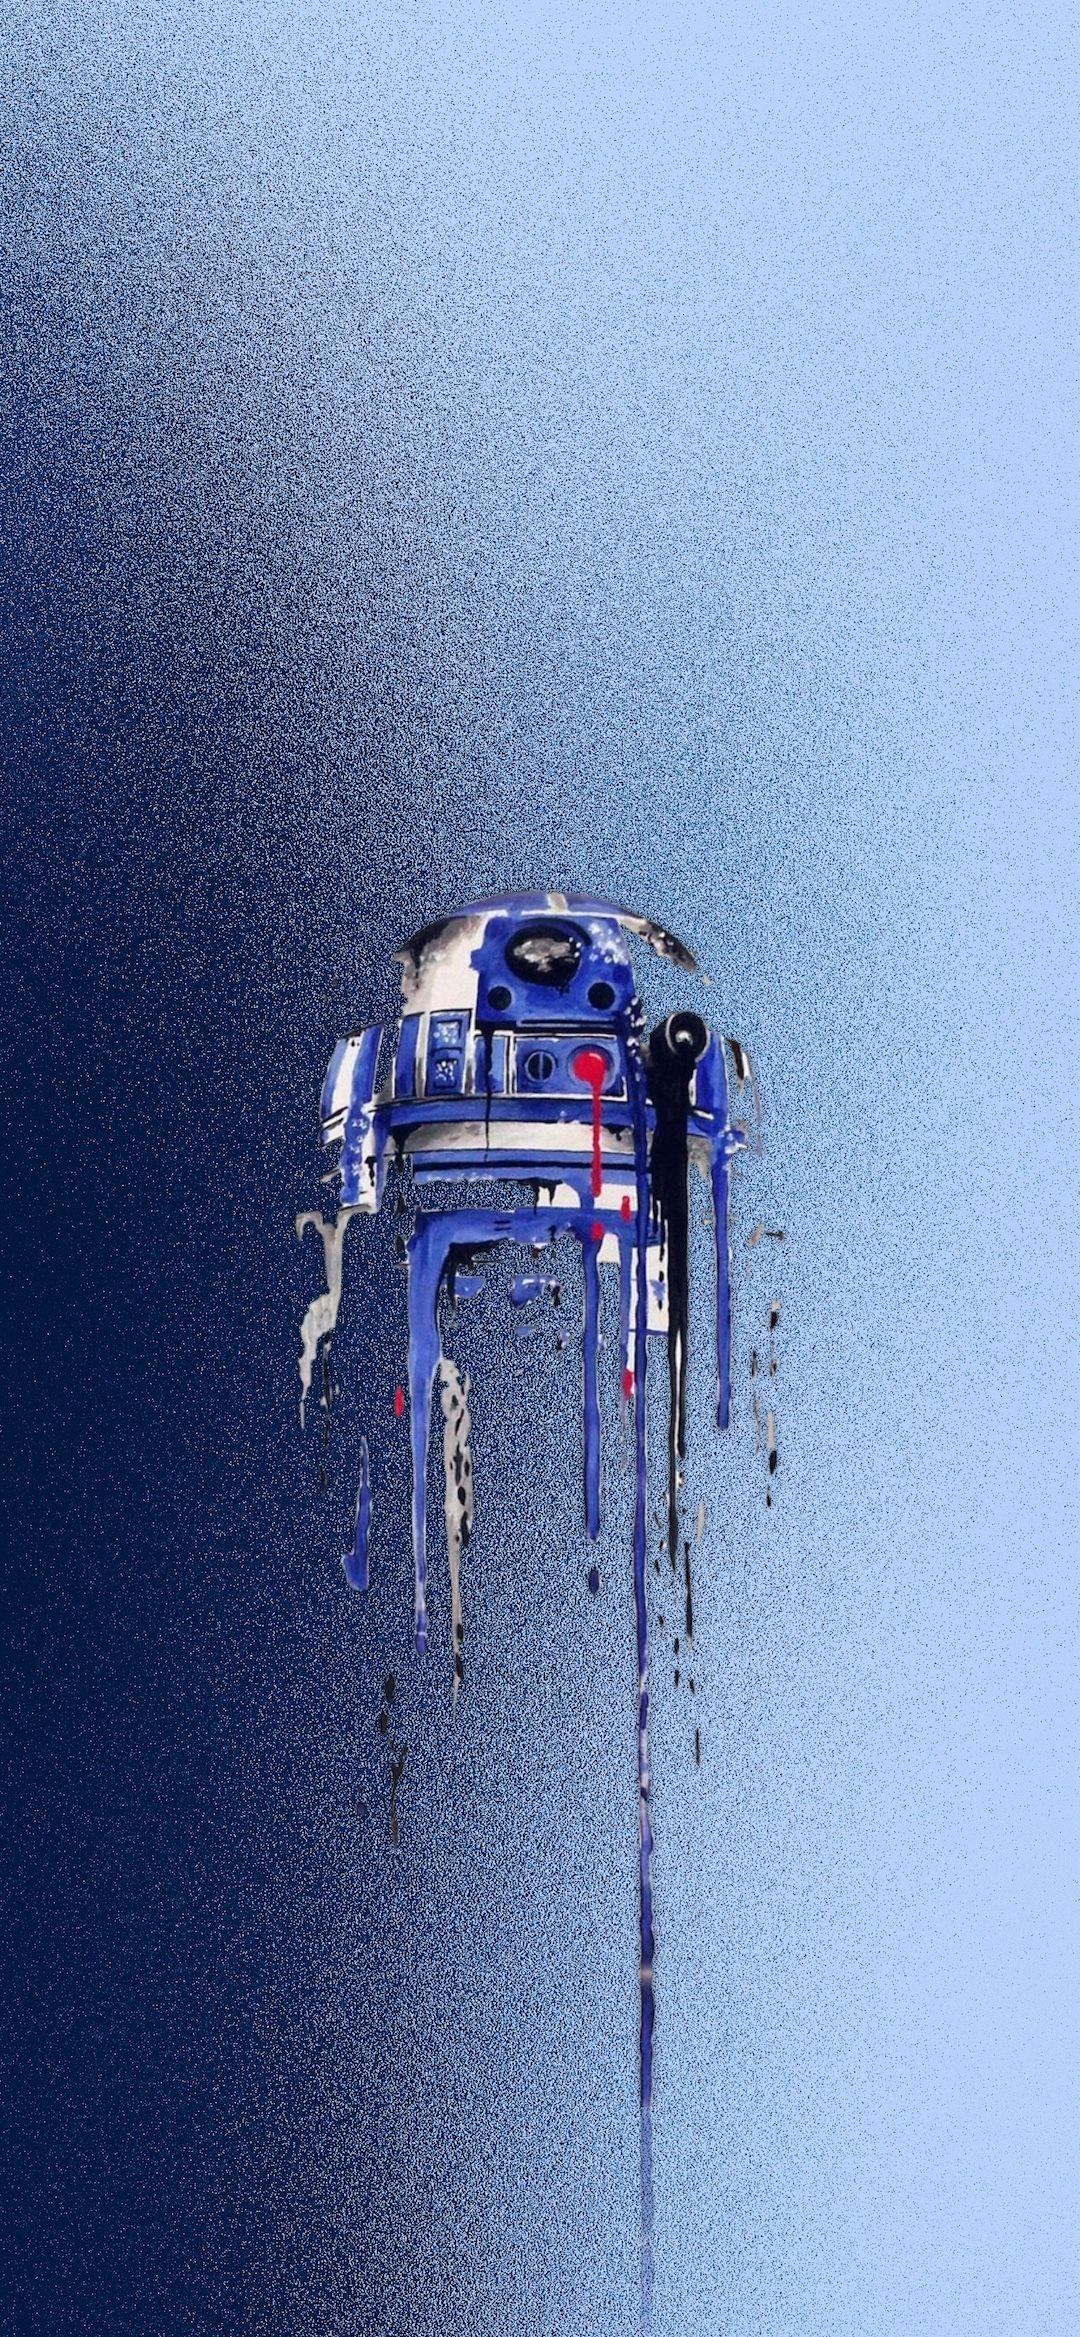 Star Wars Iphone X Wallpapers Top Free Star Wars Iphone X Backgrounds Wallpaperaccess